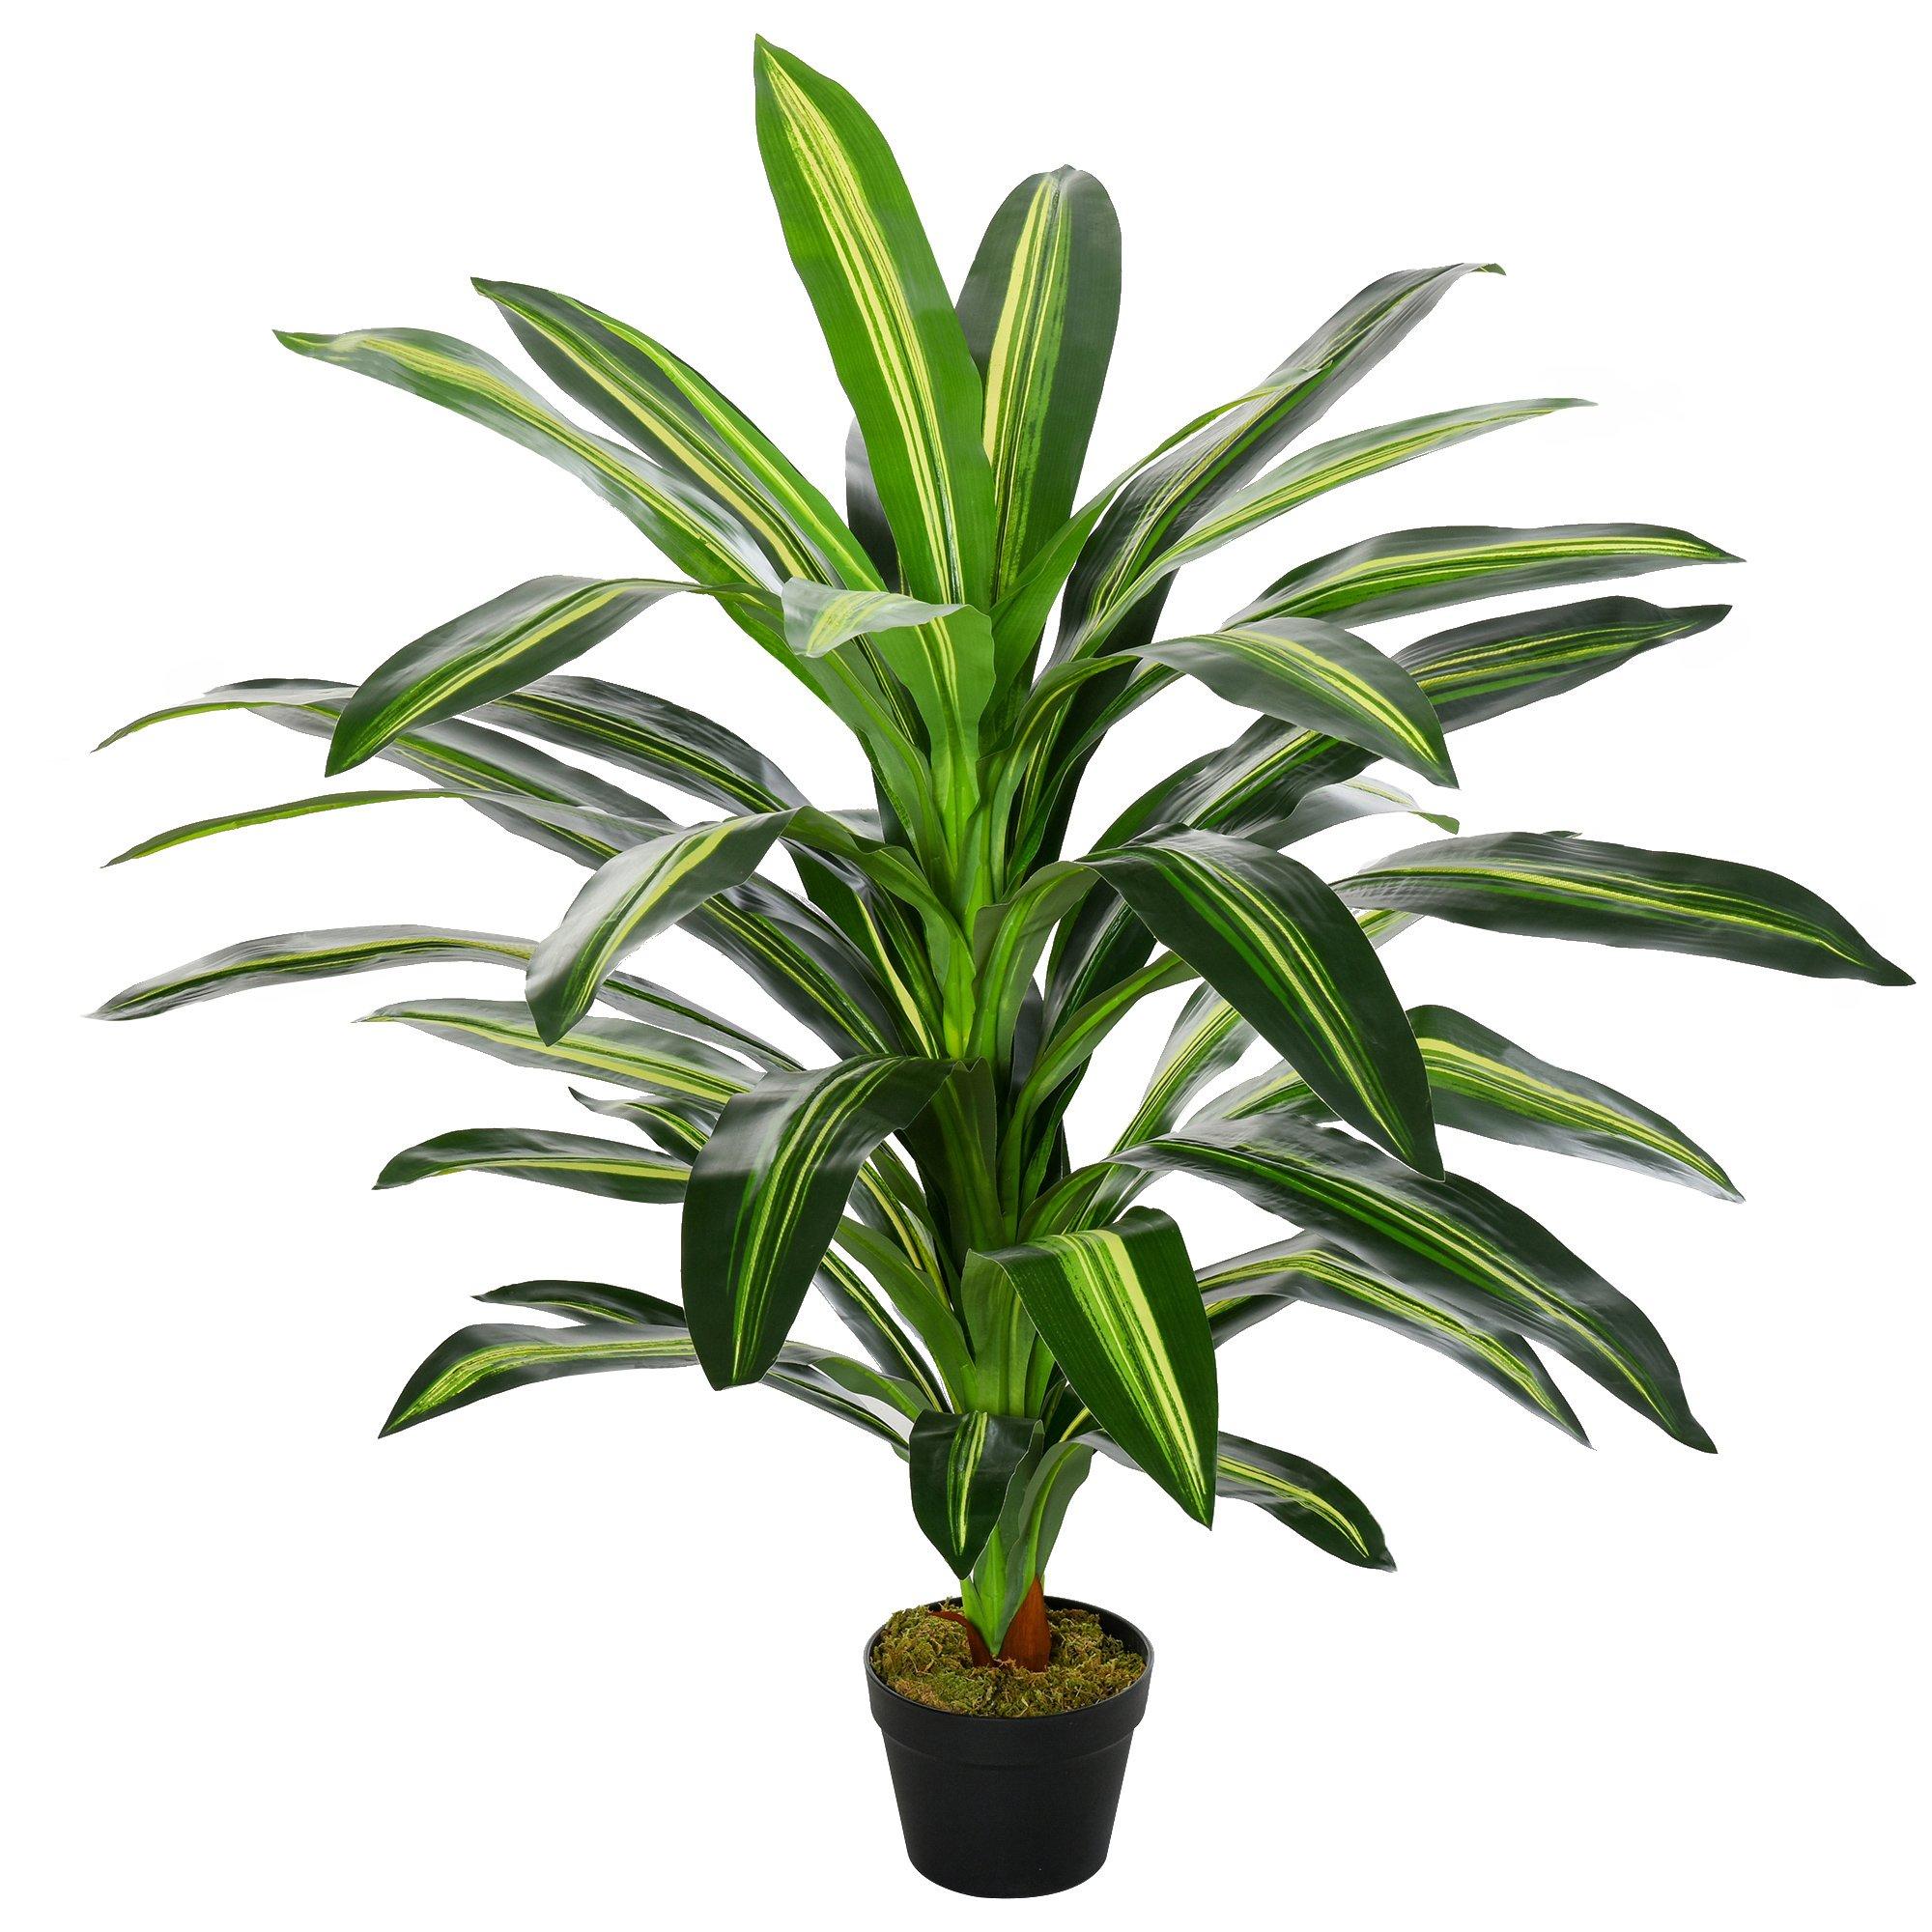 110cm/3.6FT Artificial Dracaena Plant Realistic Fake Tree Potted